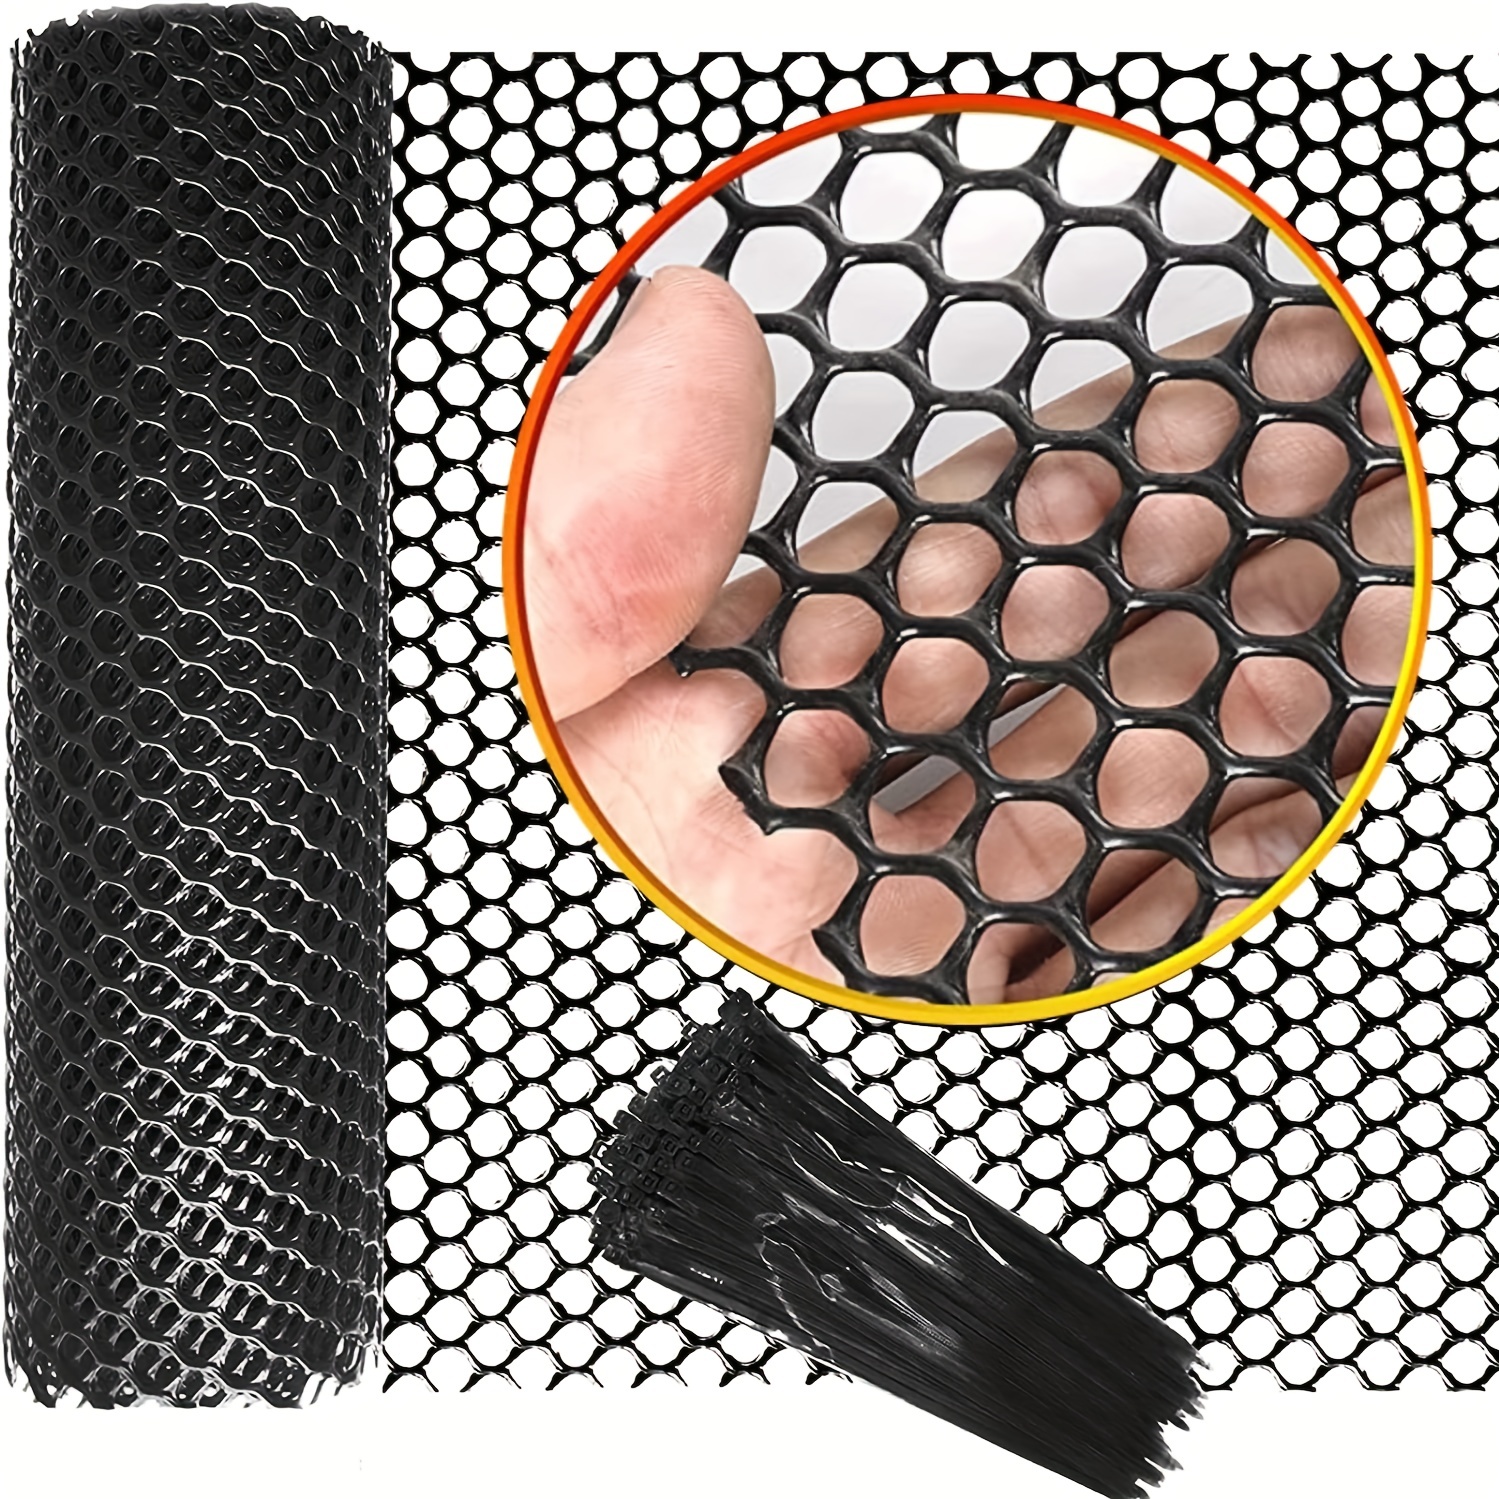 Tboline Chicken Wire Fence Mesh Fencing Wire Gardening Poultry Floral Net (Black), Size: 300